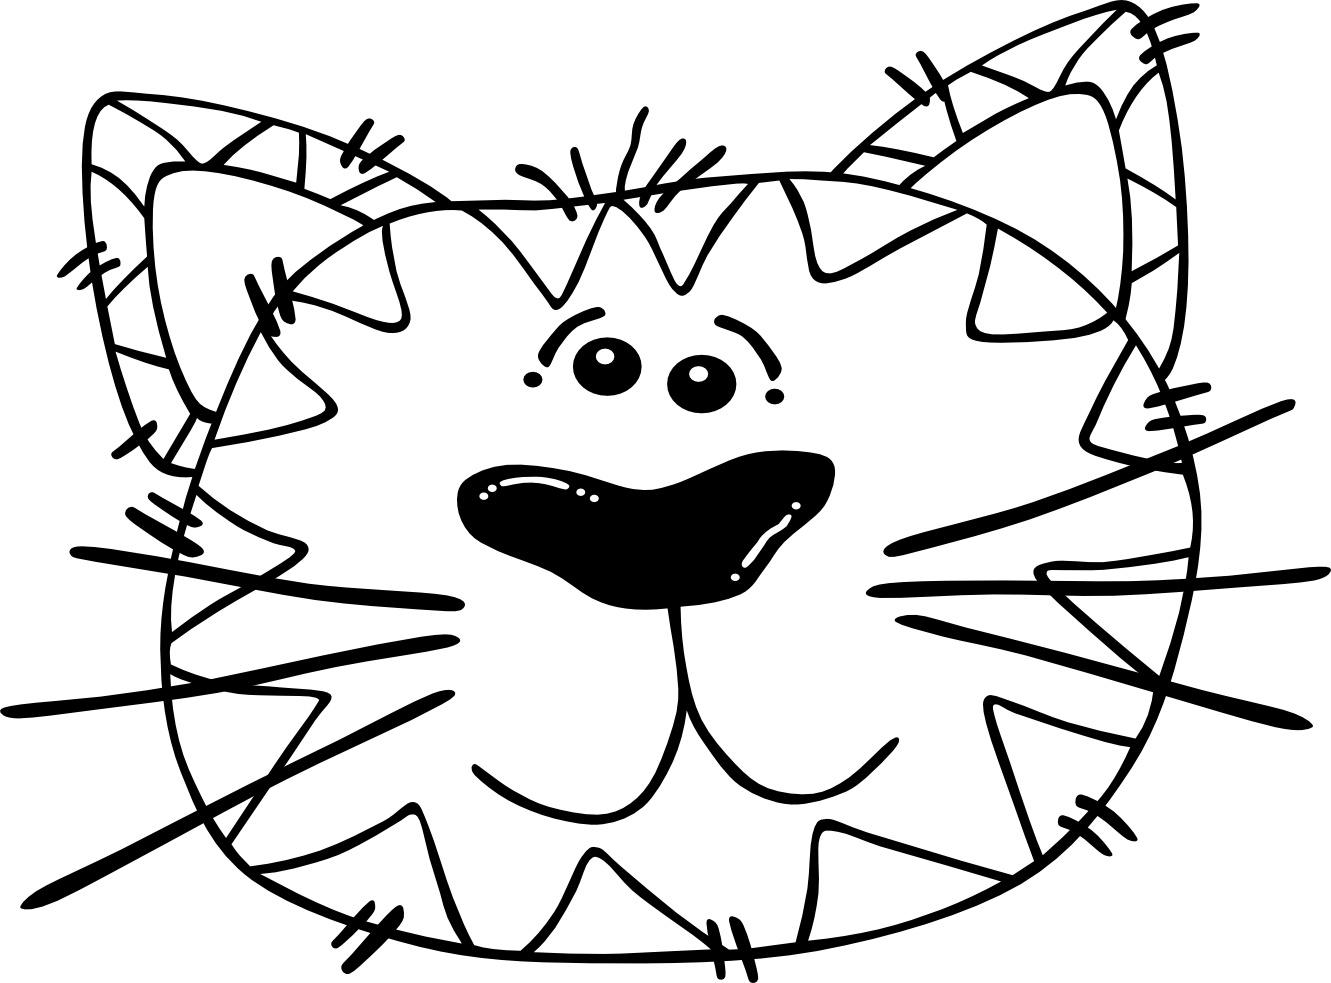 Cat face coloring page - Coloring Pages & Pictures - IMAGIXS